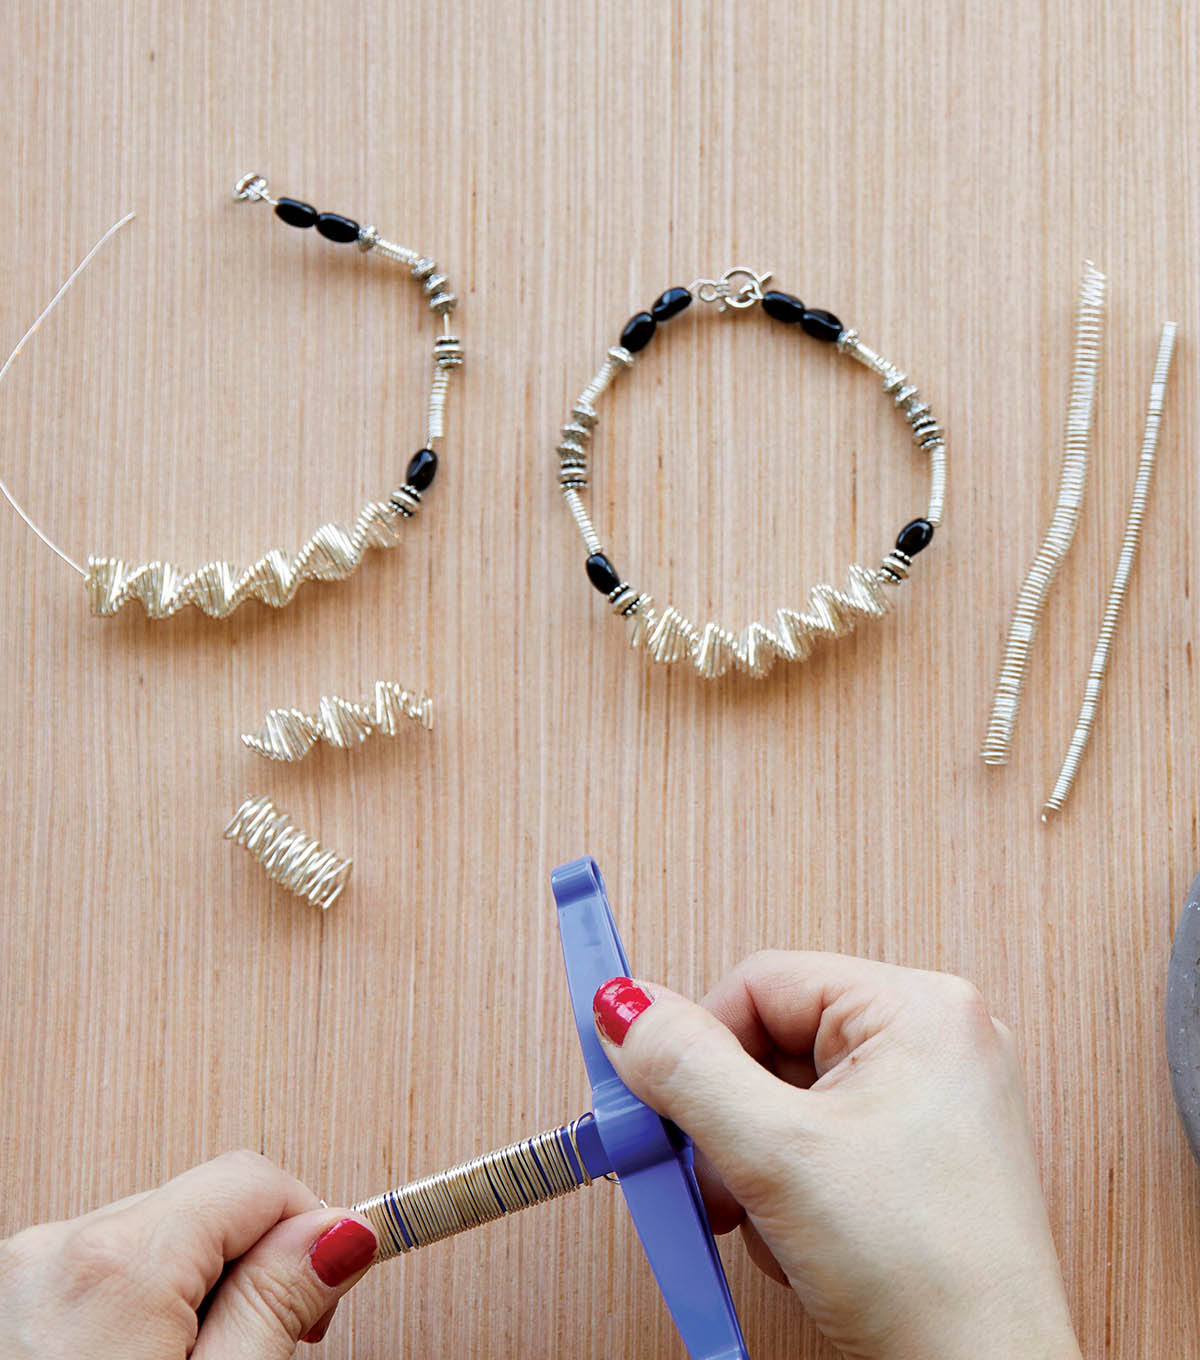 How To Make A Wire Twist and Curl Bracelet | JOANN